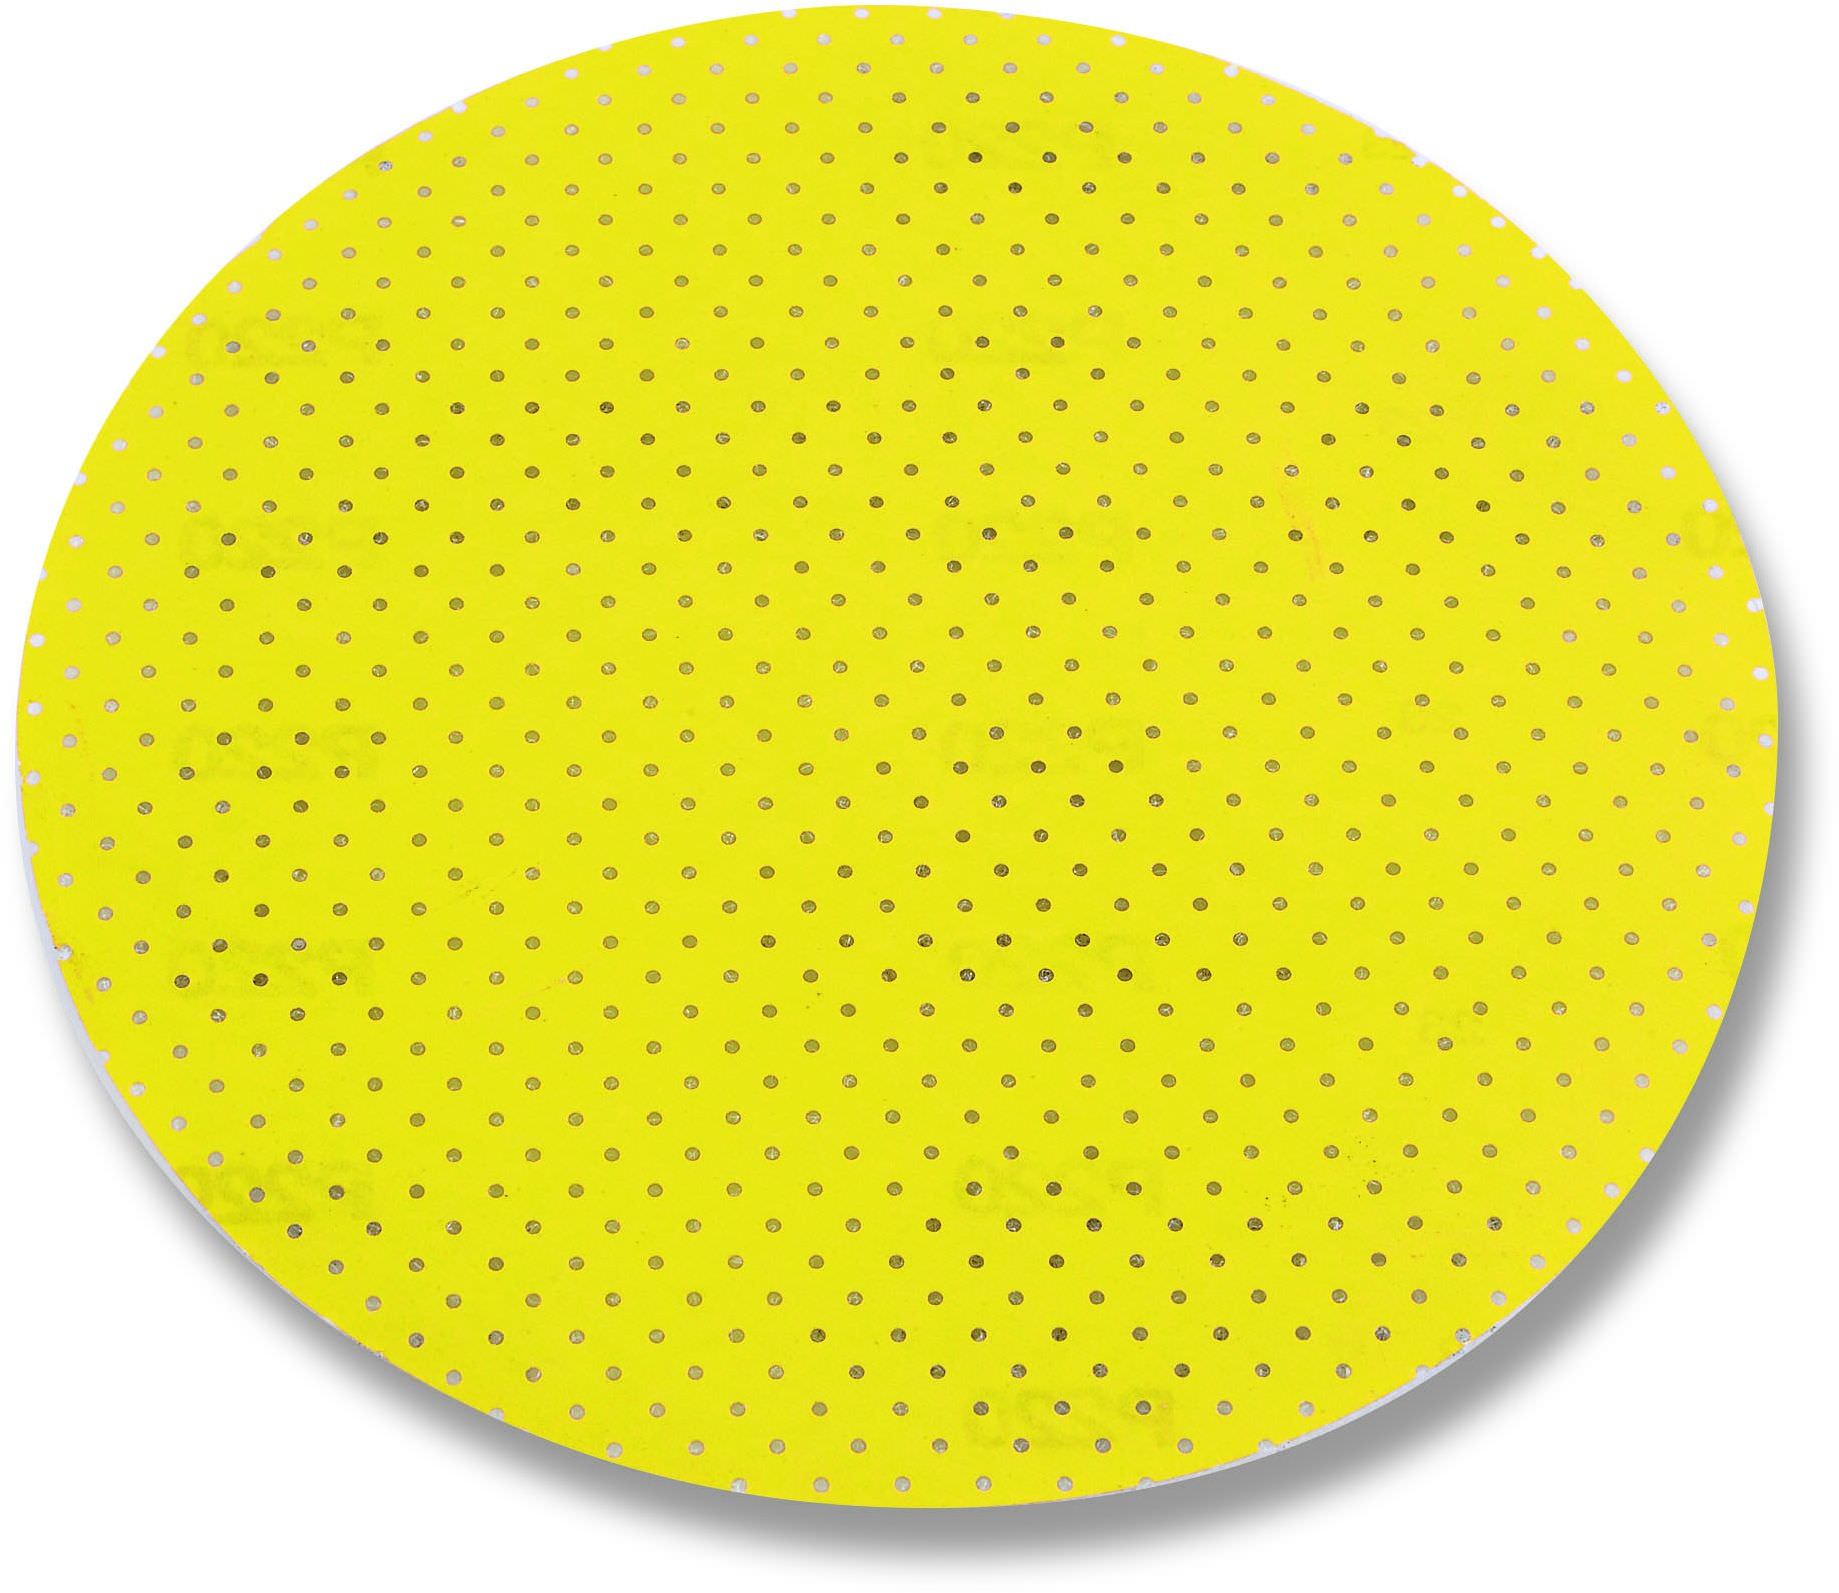 Flex Perforated Sanding Discs 80 Grit (25 Pack) Gyproc Tools Gyproc  Tools